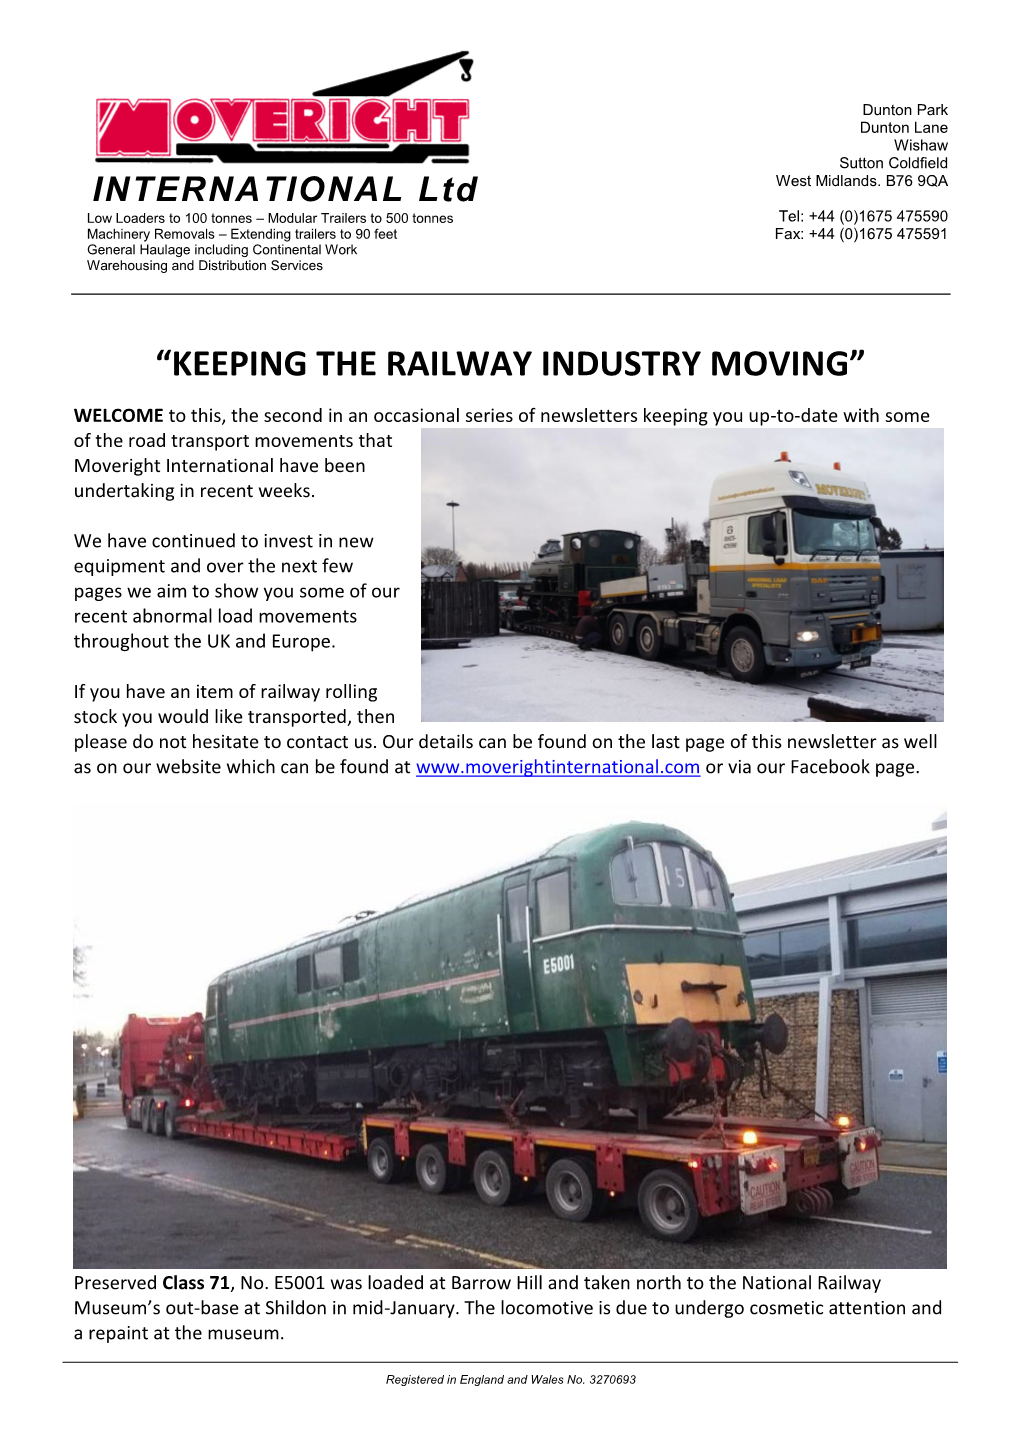 “Keeping the Railway Industry Moving”